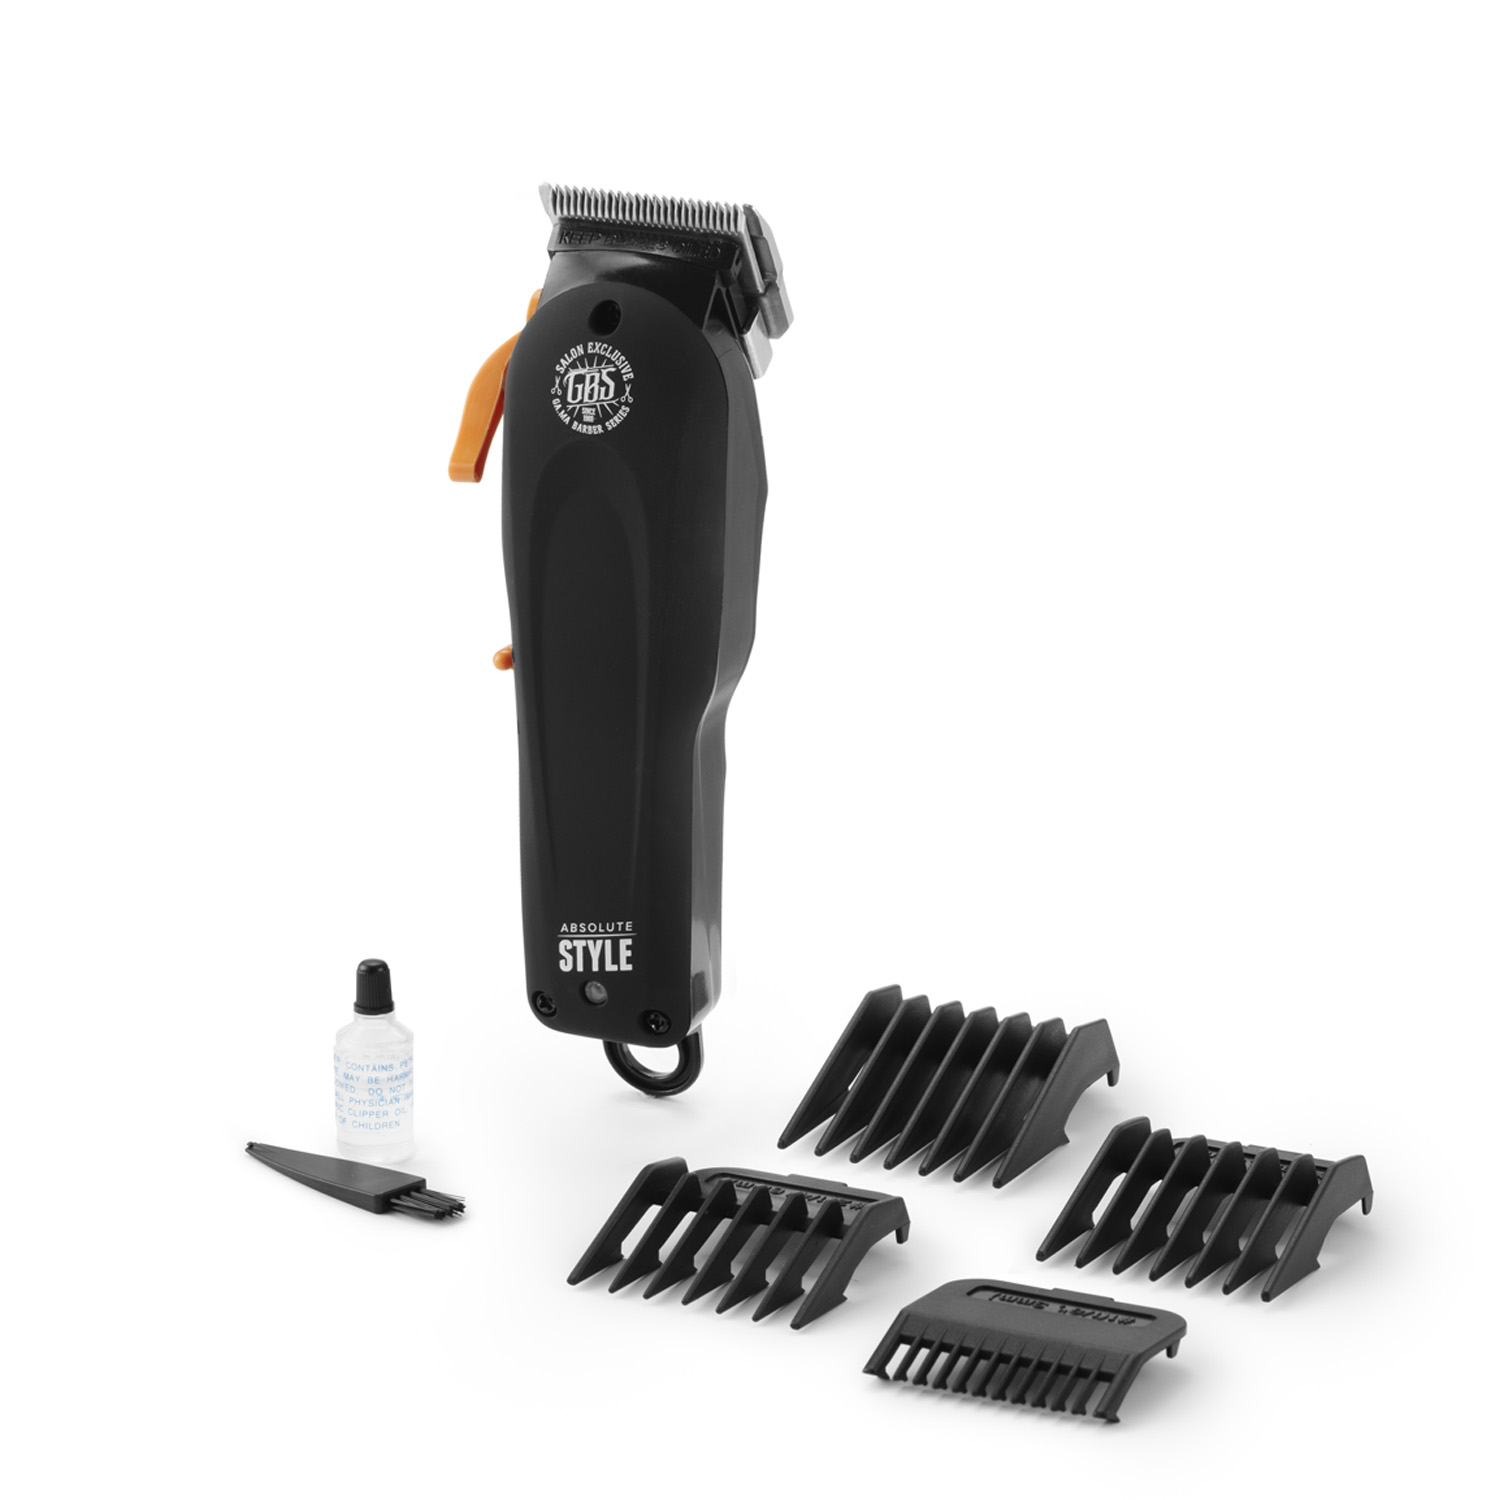 GBS Absolute Style Cordless Clipper